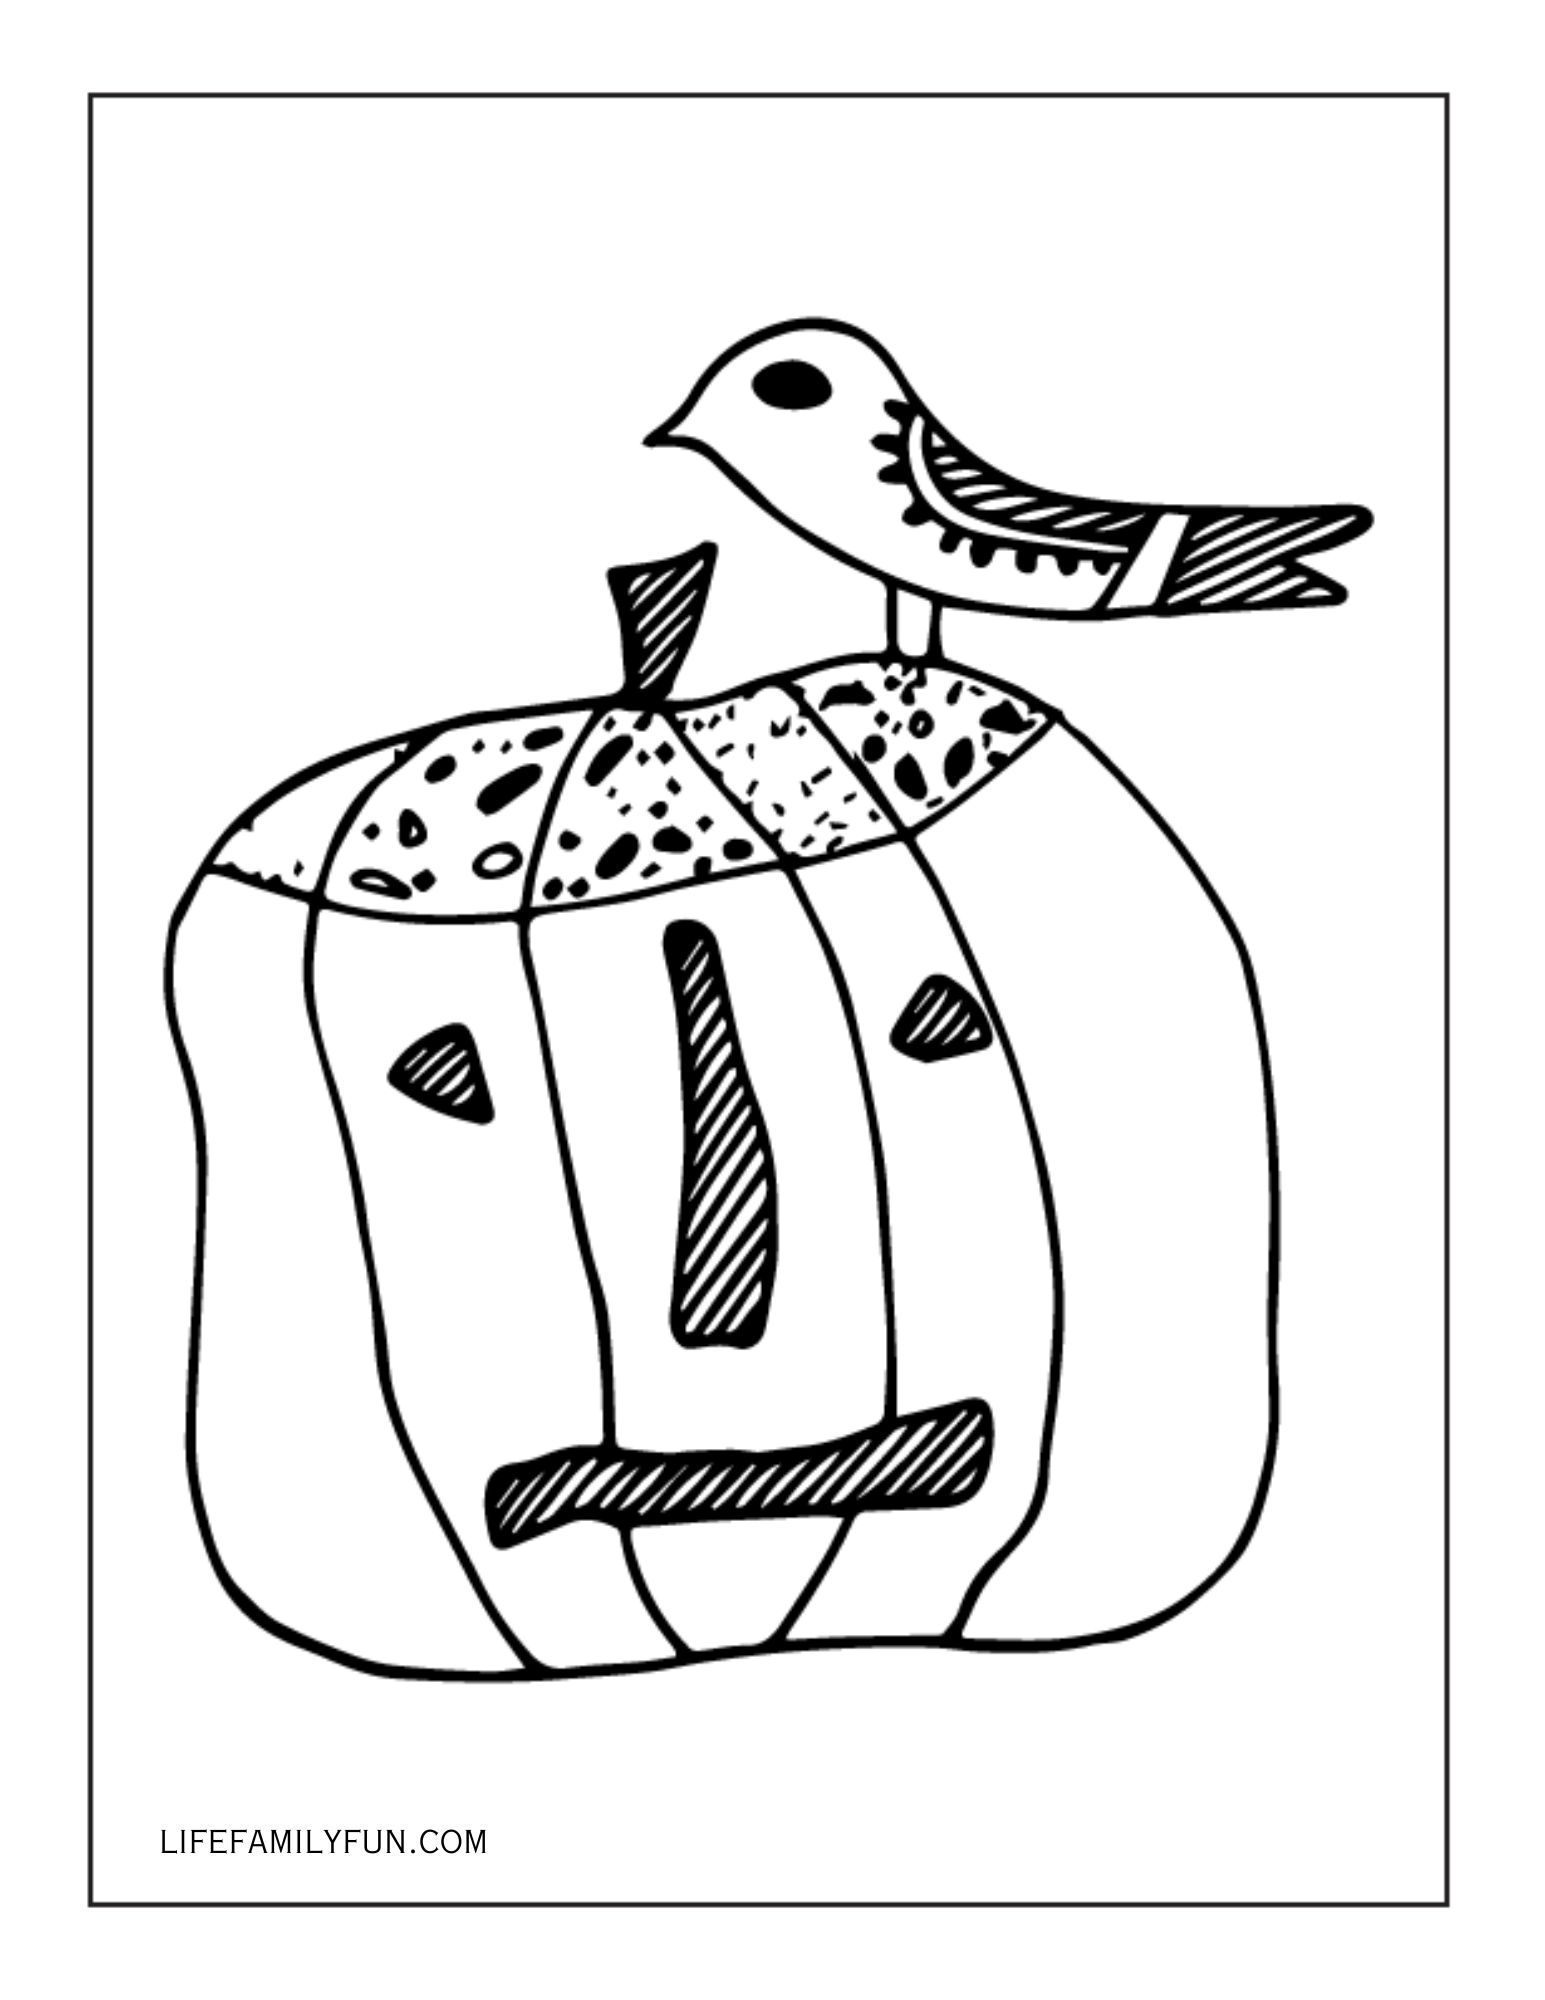 Bird and Halloween Pumpkin Coloring Page